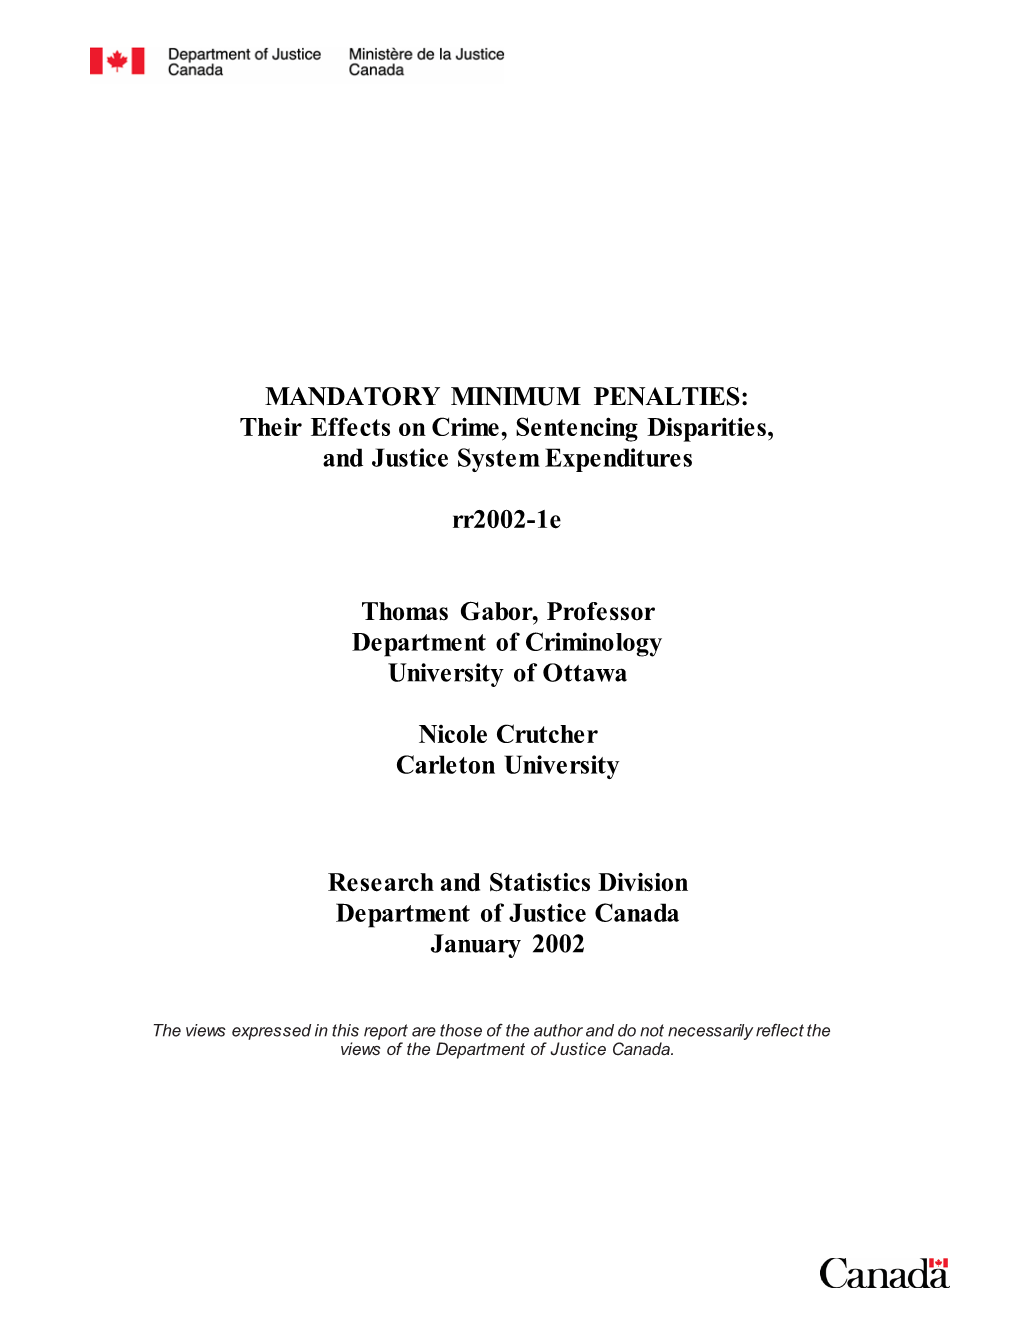 MANDATORY MINIMUM PENALTIES: Their Effects on Crime, Sentencing Disparities, and Justice System Expenditures